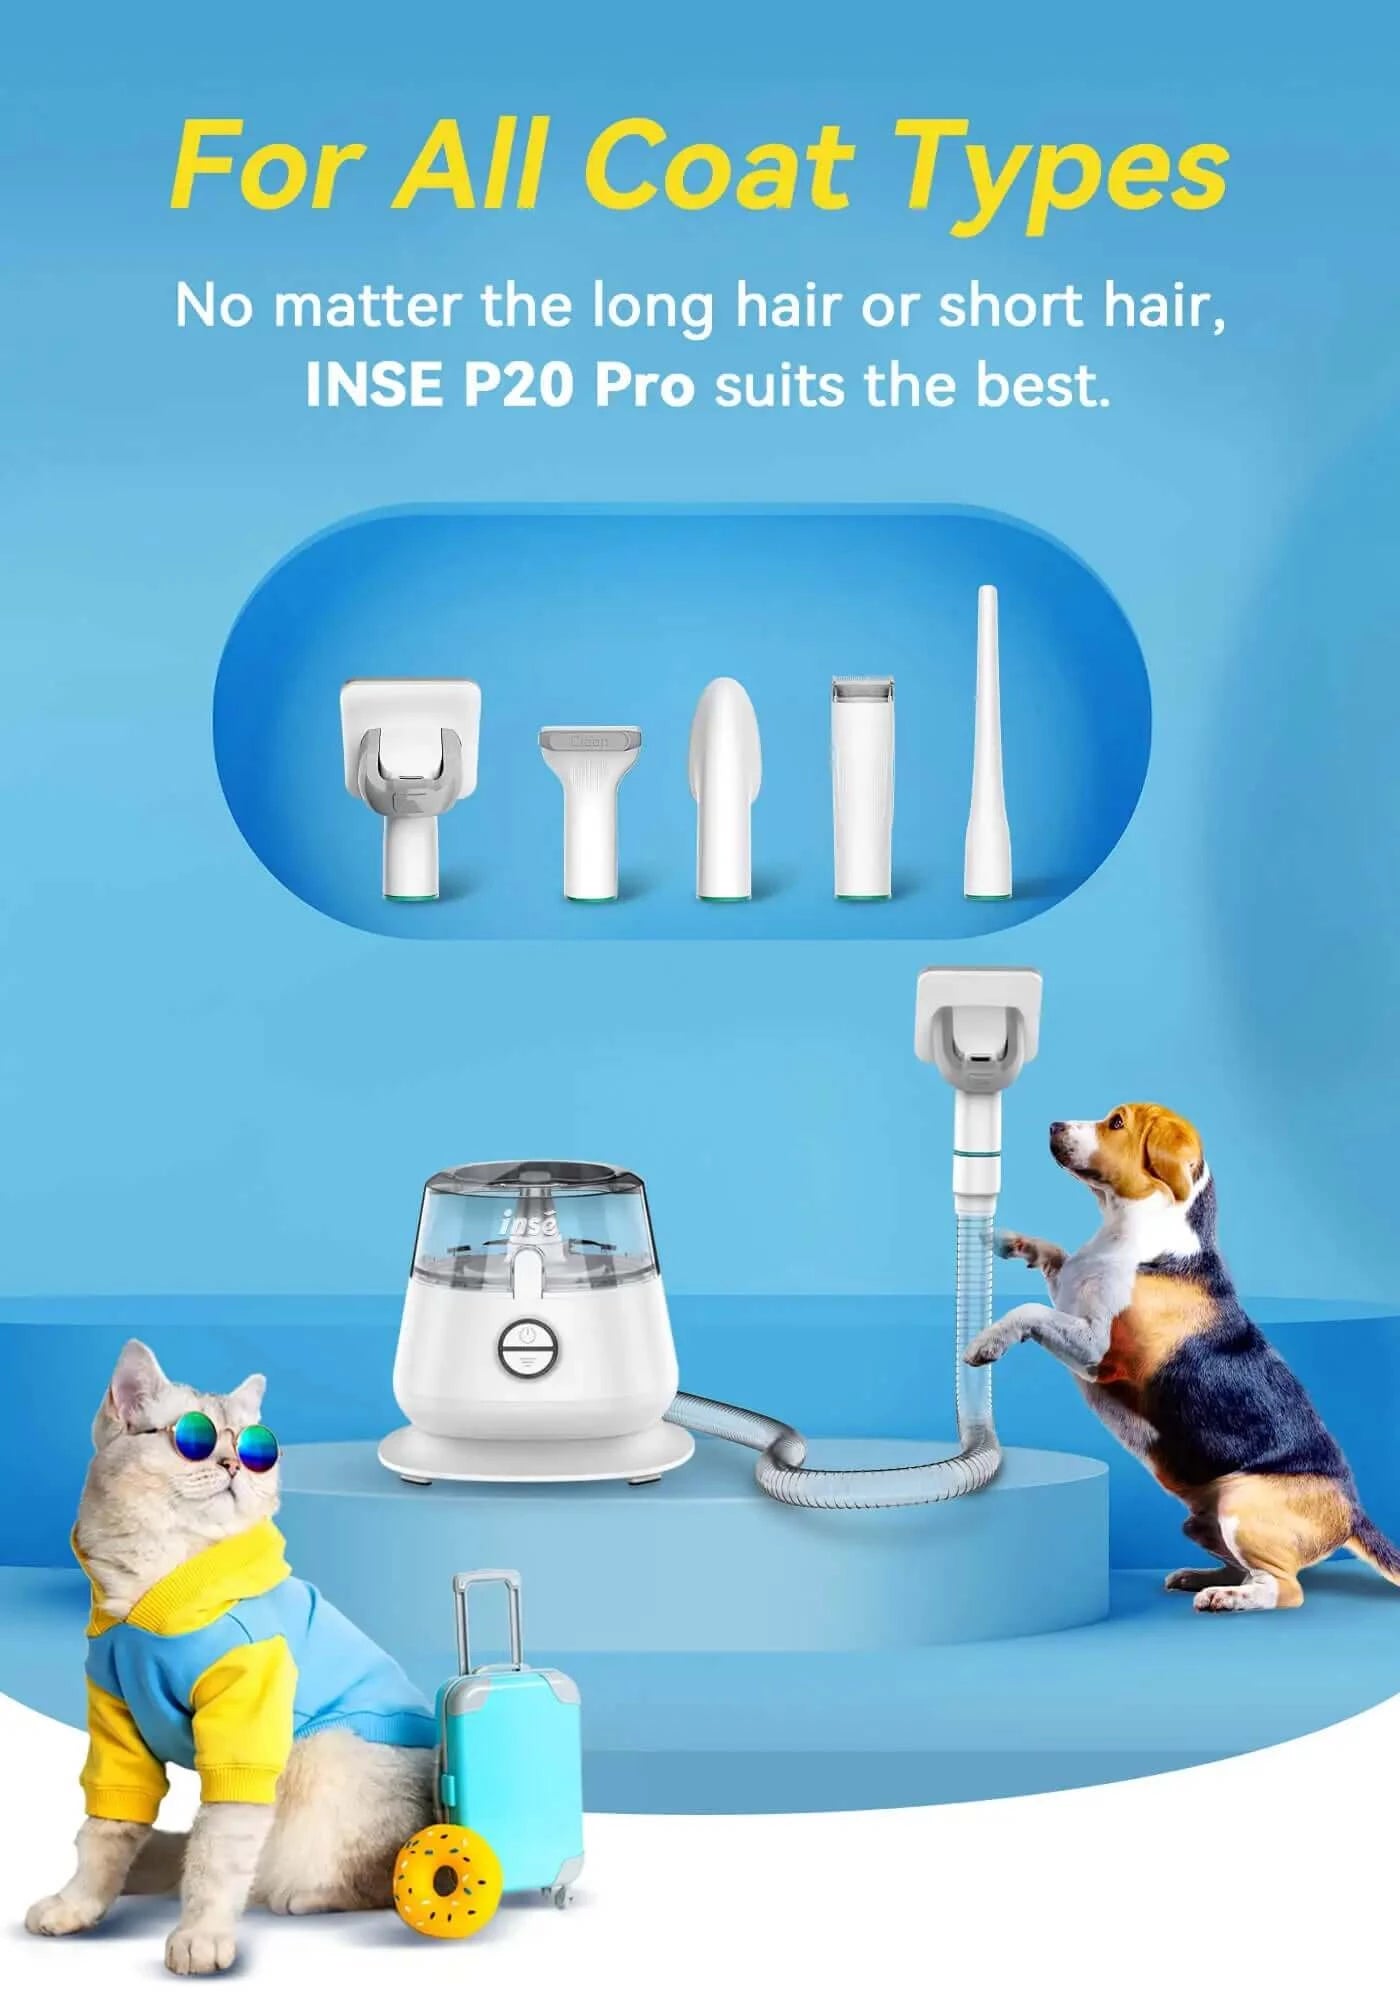 inse p20 pro dog grooming kit for all coat types for mobile-inselife.com